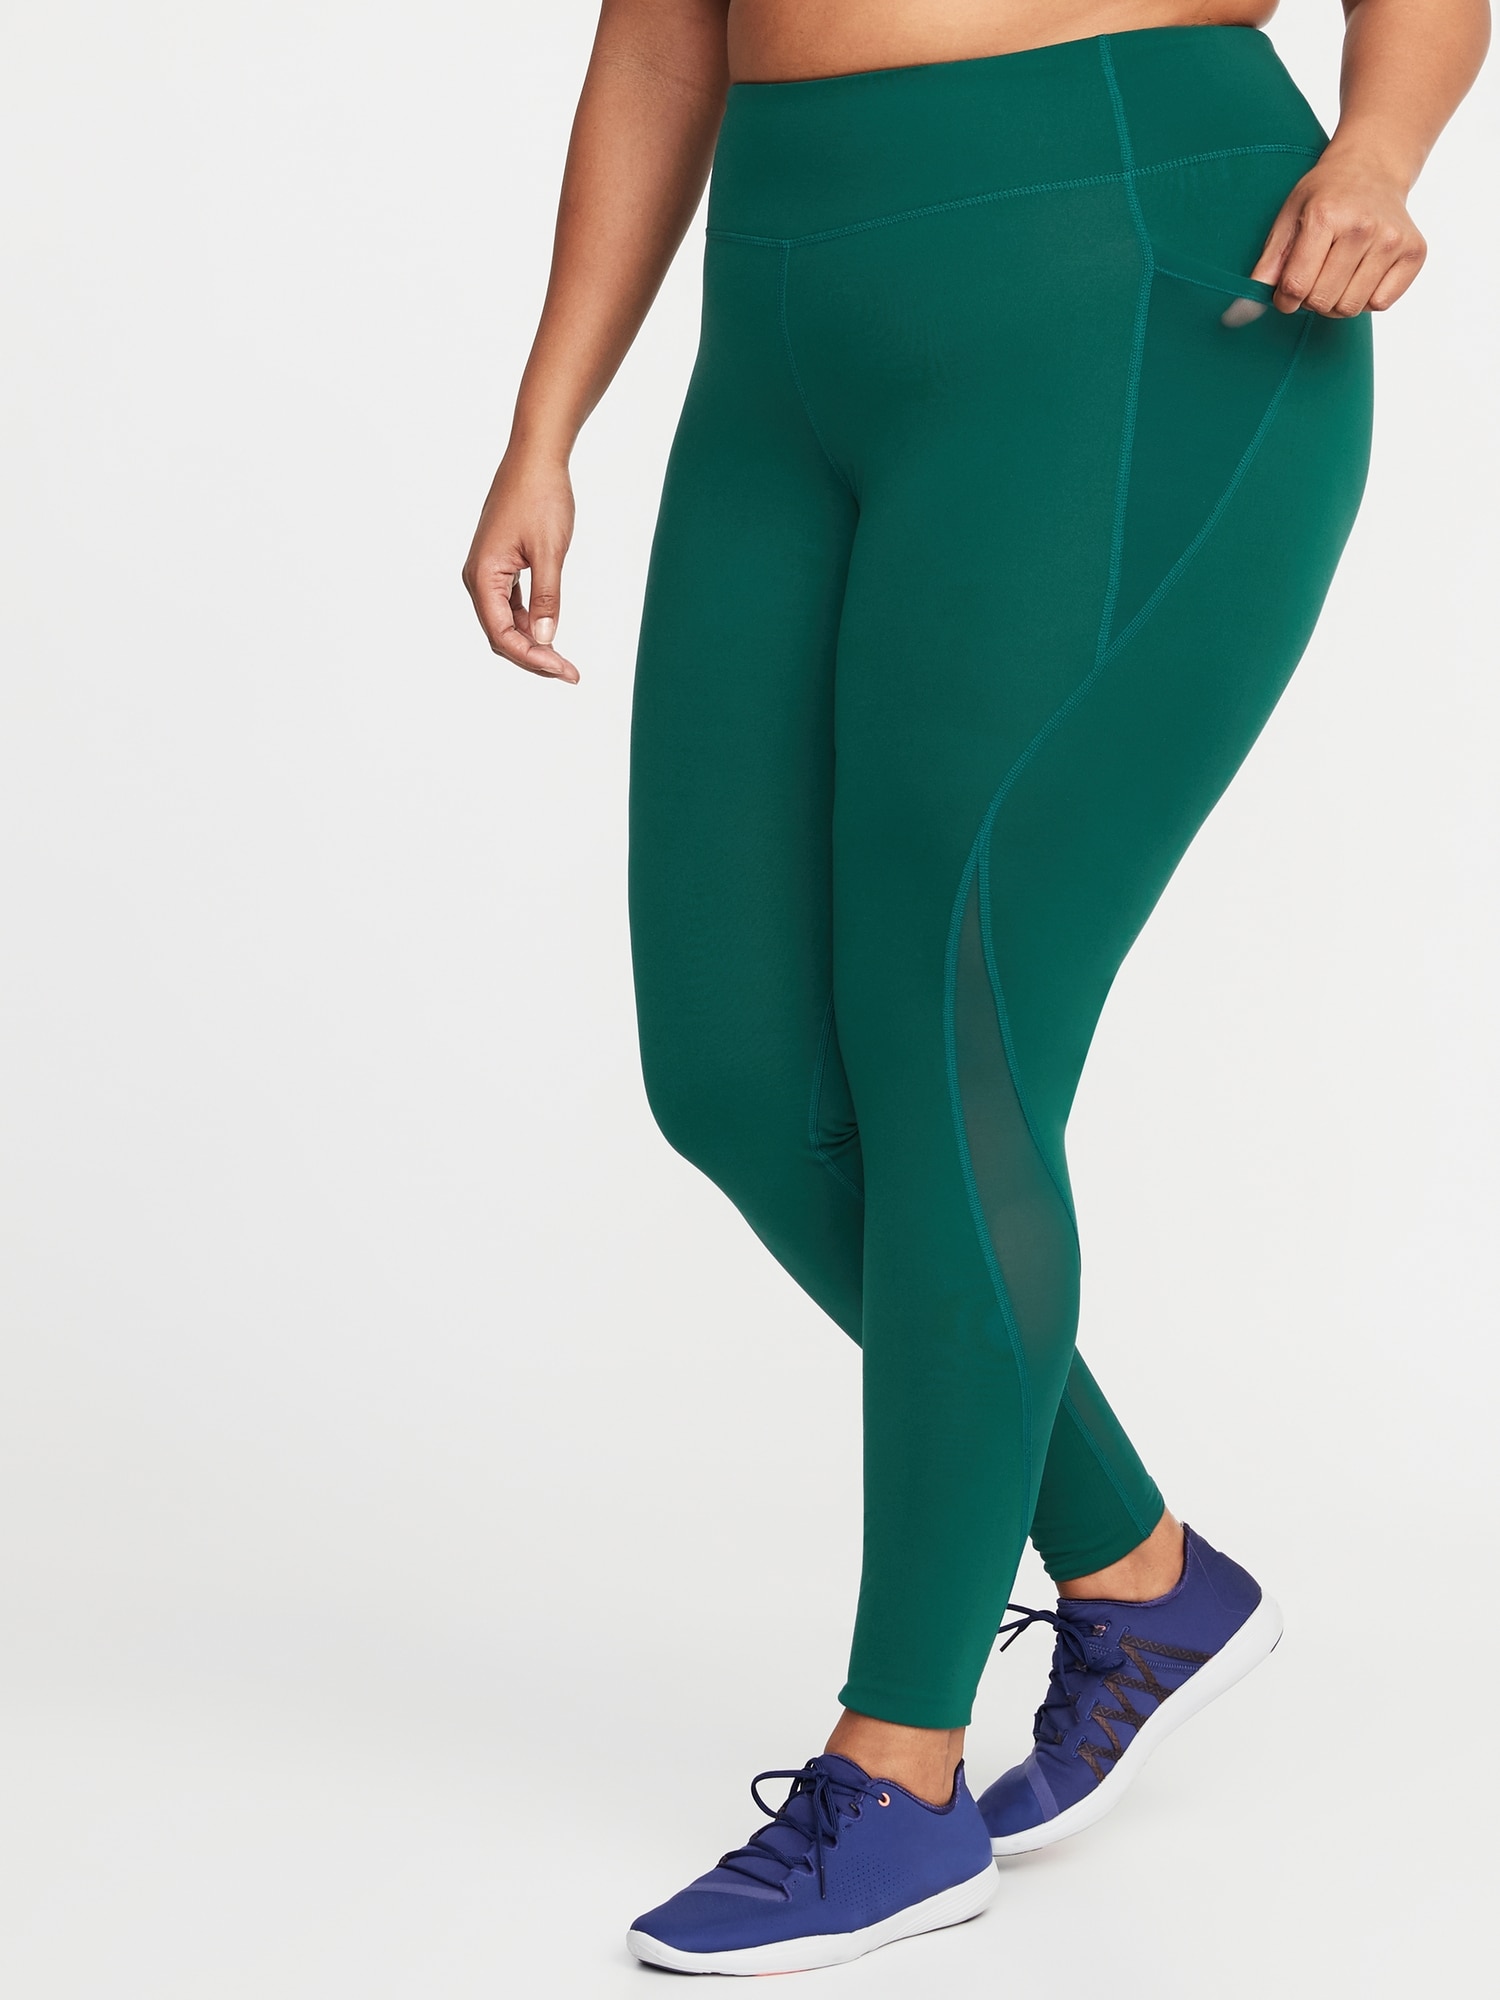 Old navy active elevate legging go dry